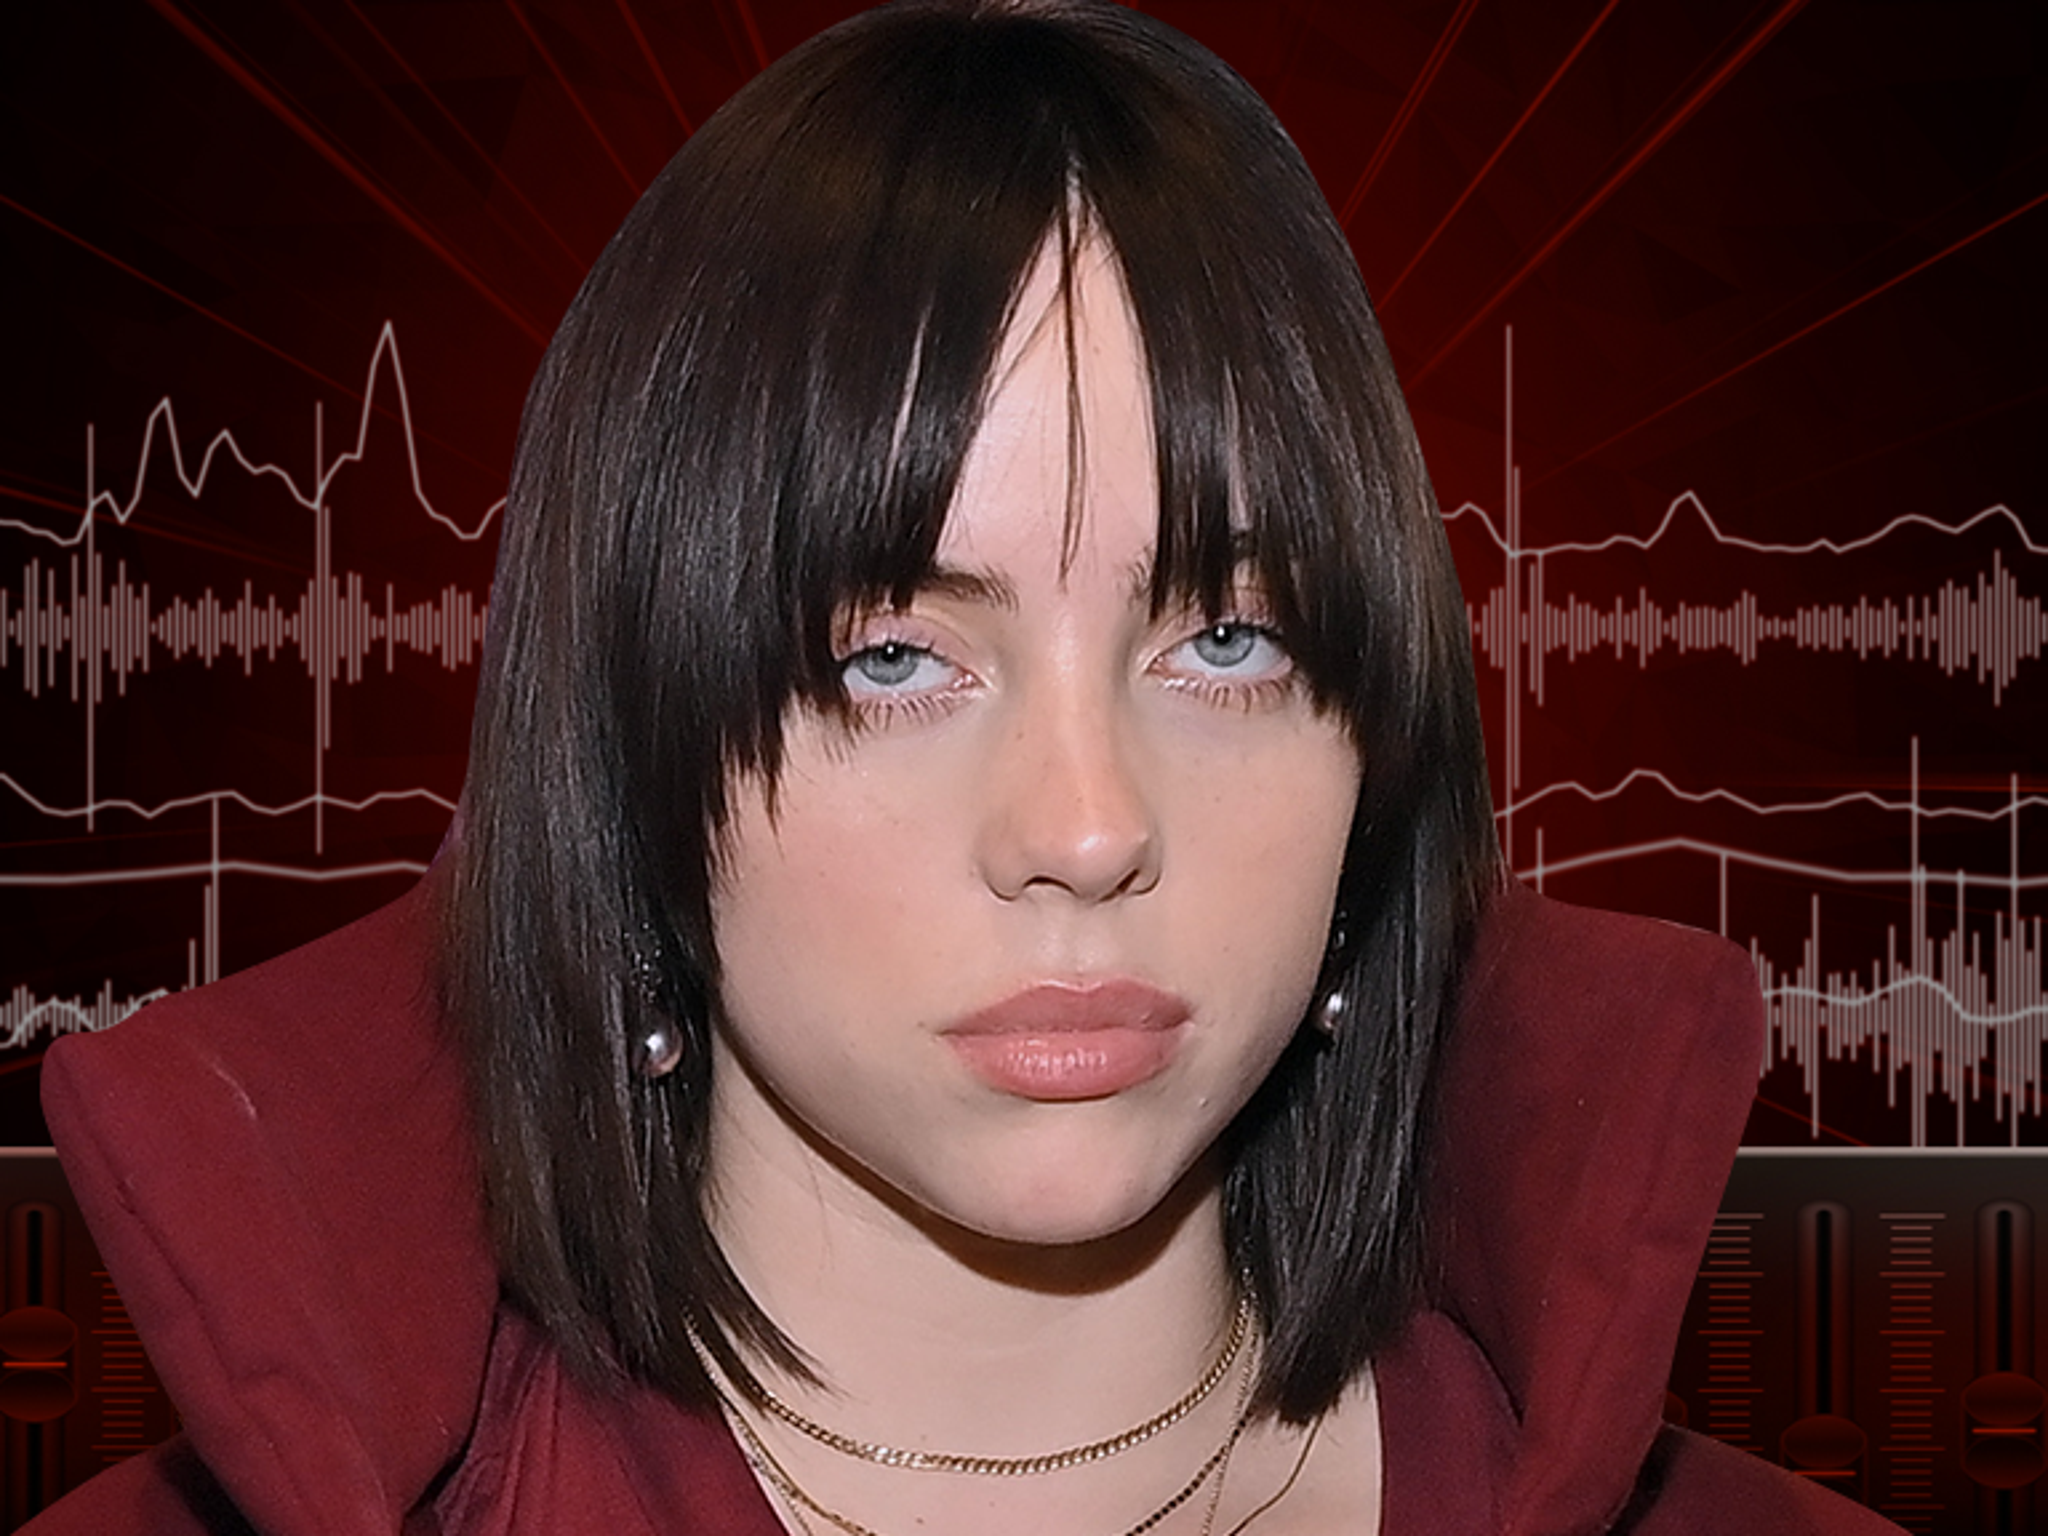 12yar Xzxx - Billie Eilish Says She Started Watching Porn at 11, Calls it 'Disgrace'